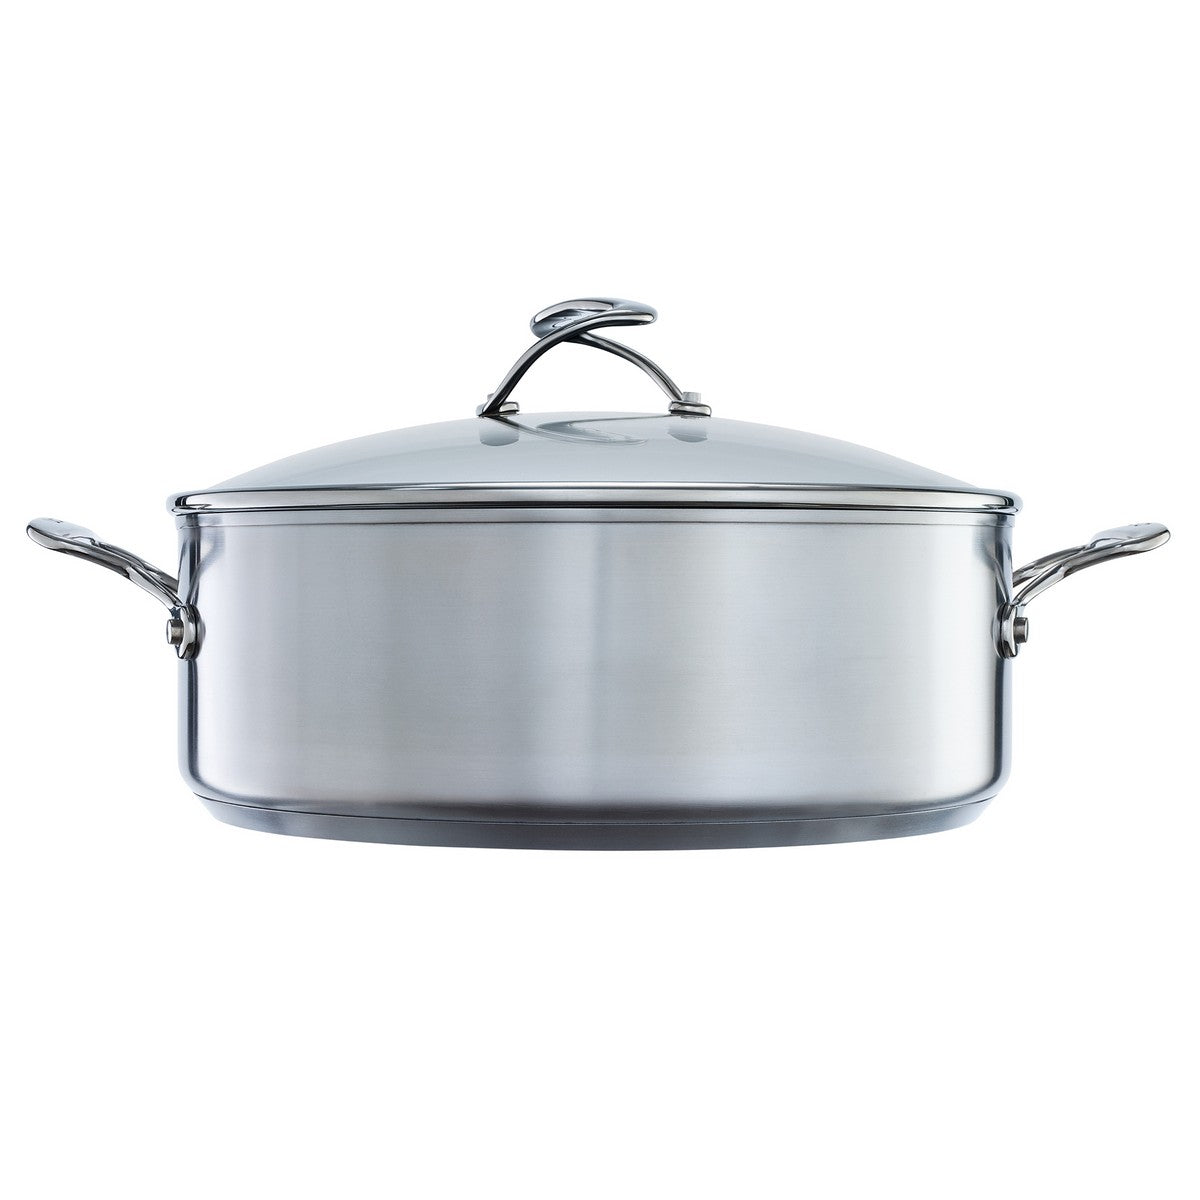 Circulon Steelshield S Series non stick stockpot with lid